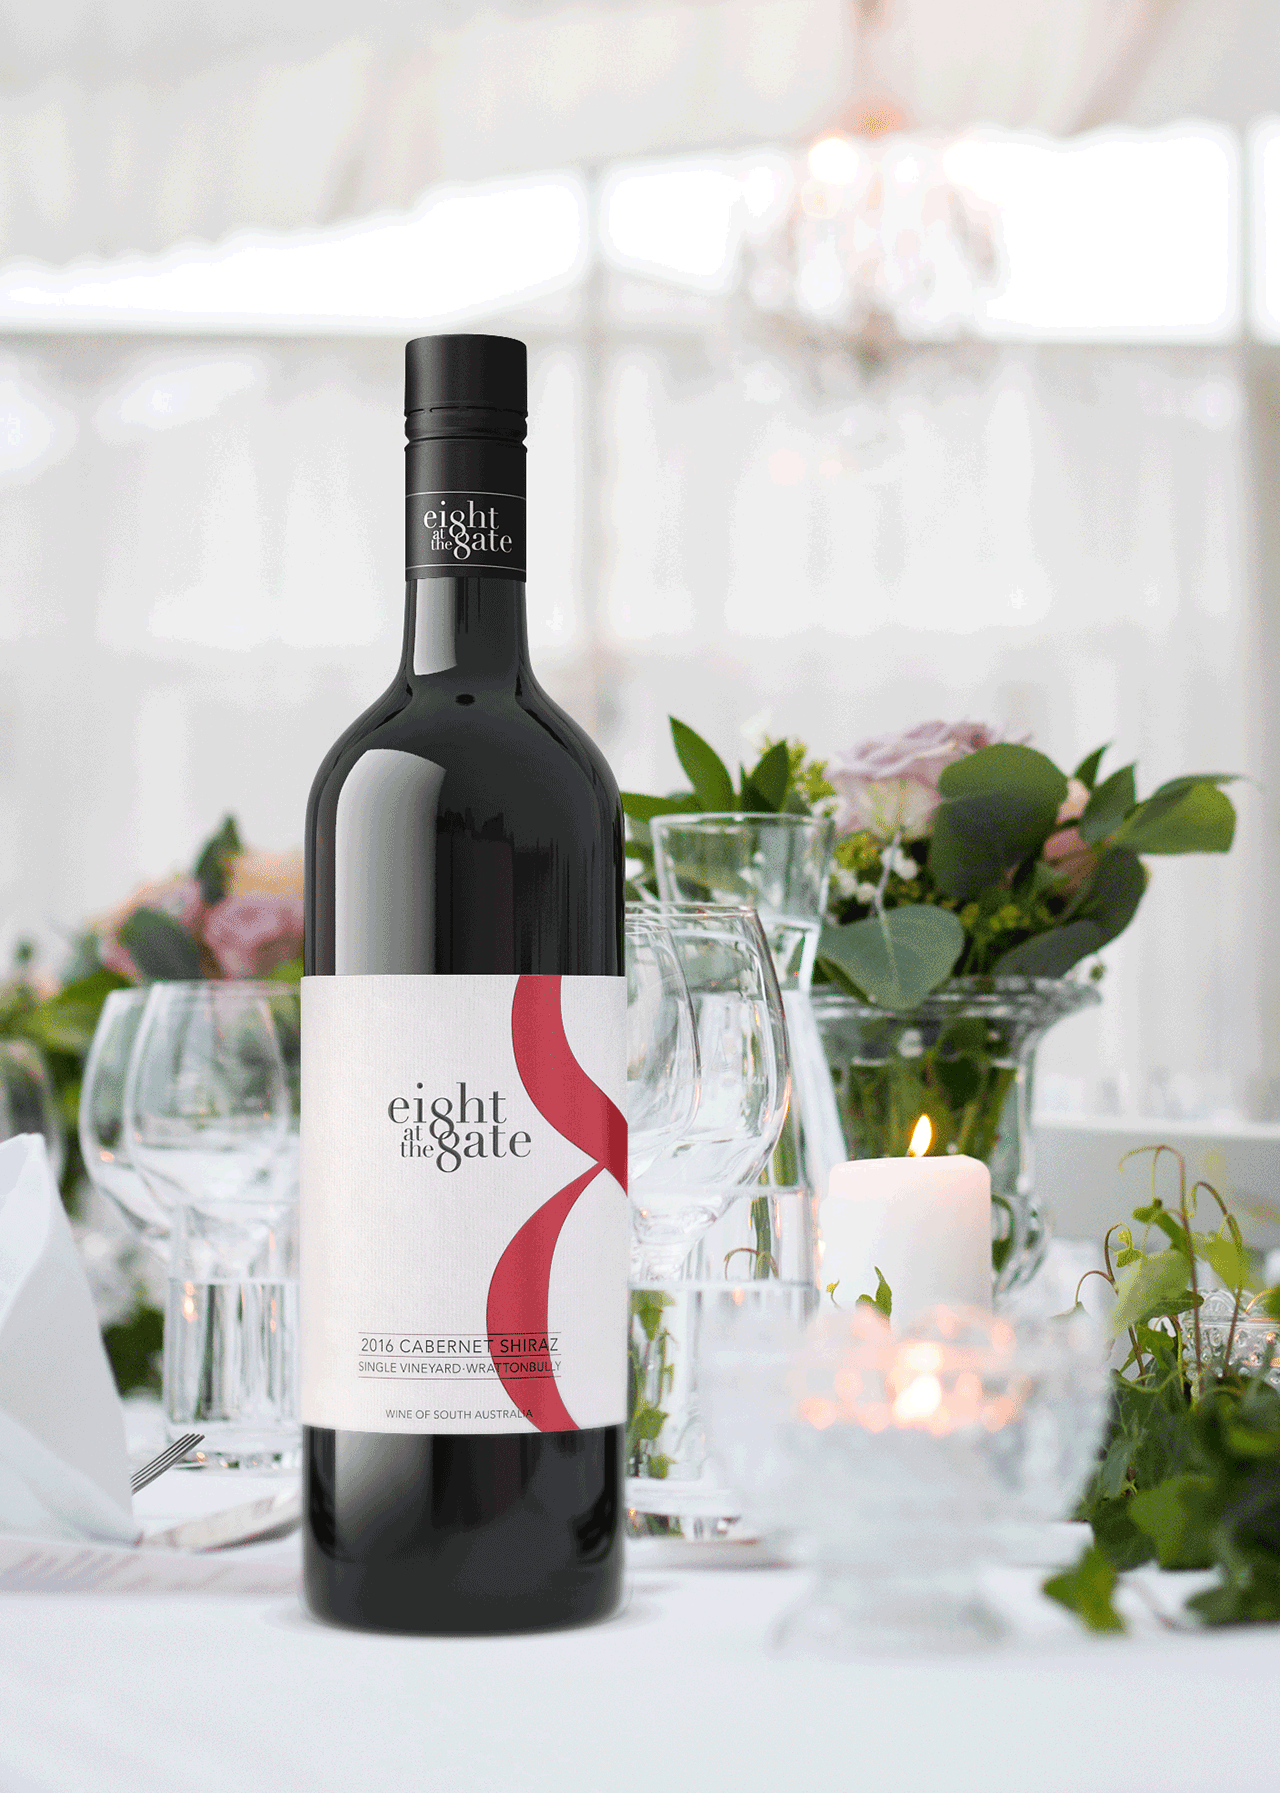 Picture of Eight at the Gate 2016 Cabernet Shiraz lifestyle image.